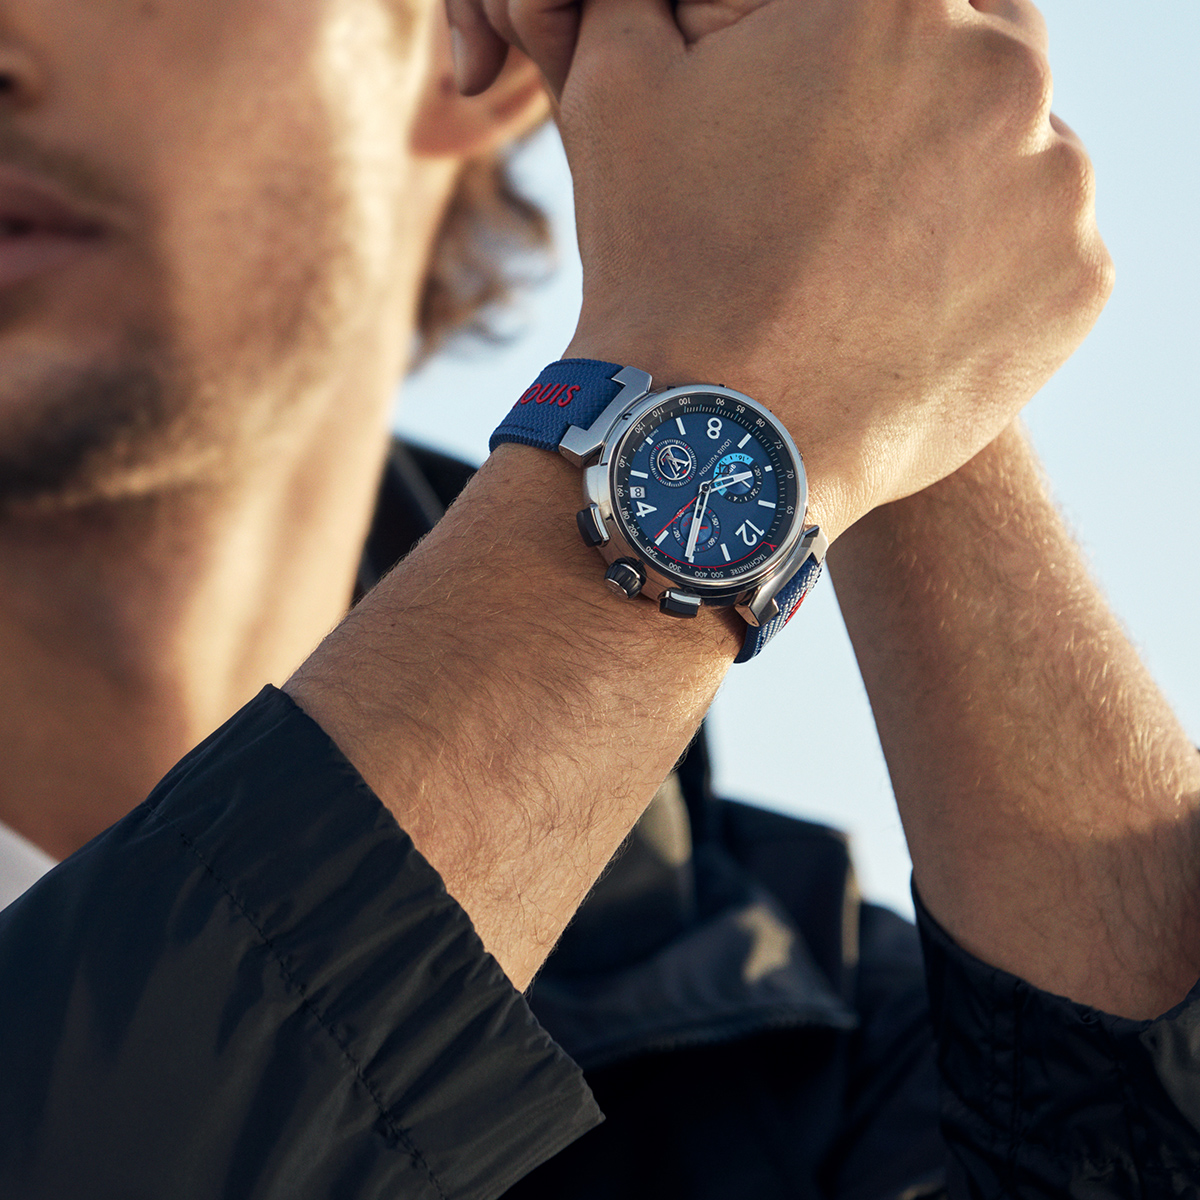 Louis Vuitton on X: Creativity through craftsmanship. #LouisVuitton  continues a tradition of exceptional watch design with the launch of Tambour  Moon Dual Time. Learn about the new GMT watches for men and